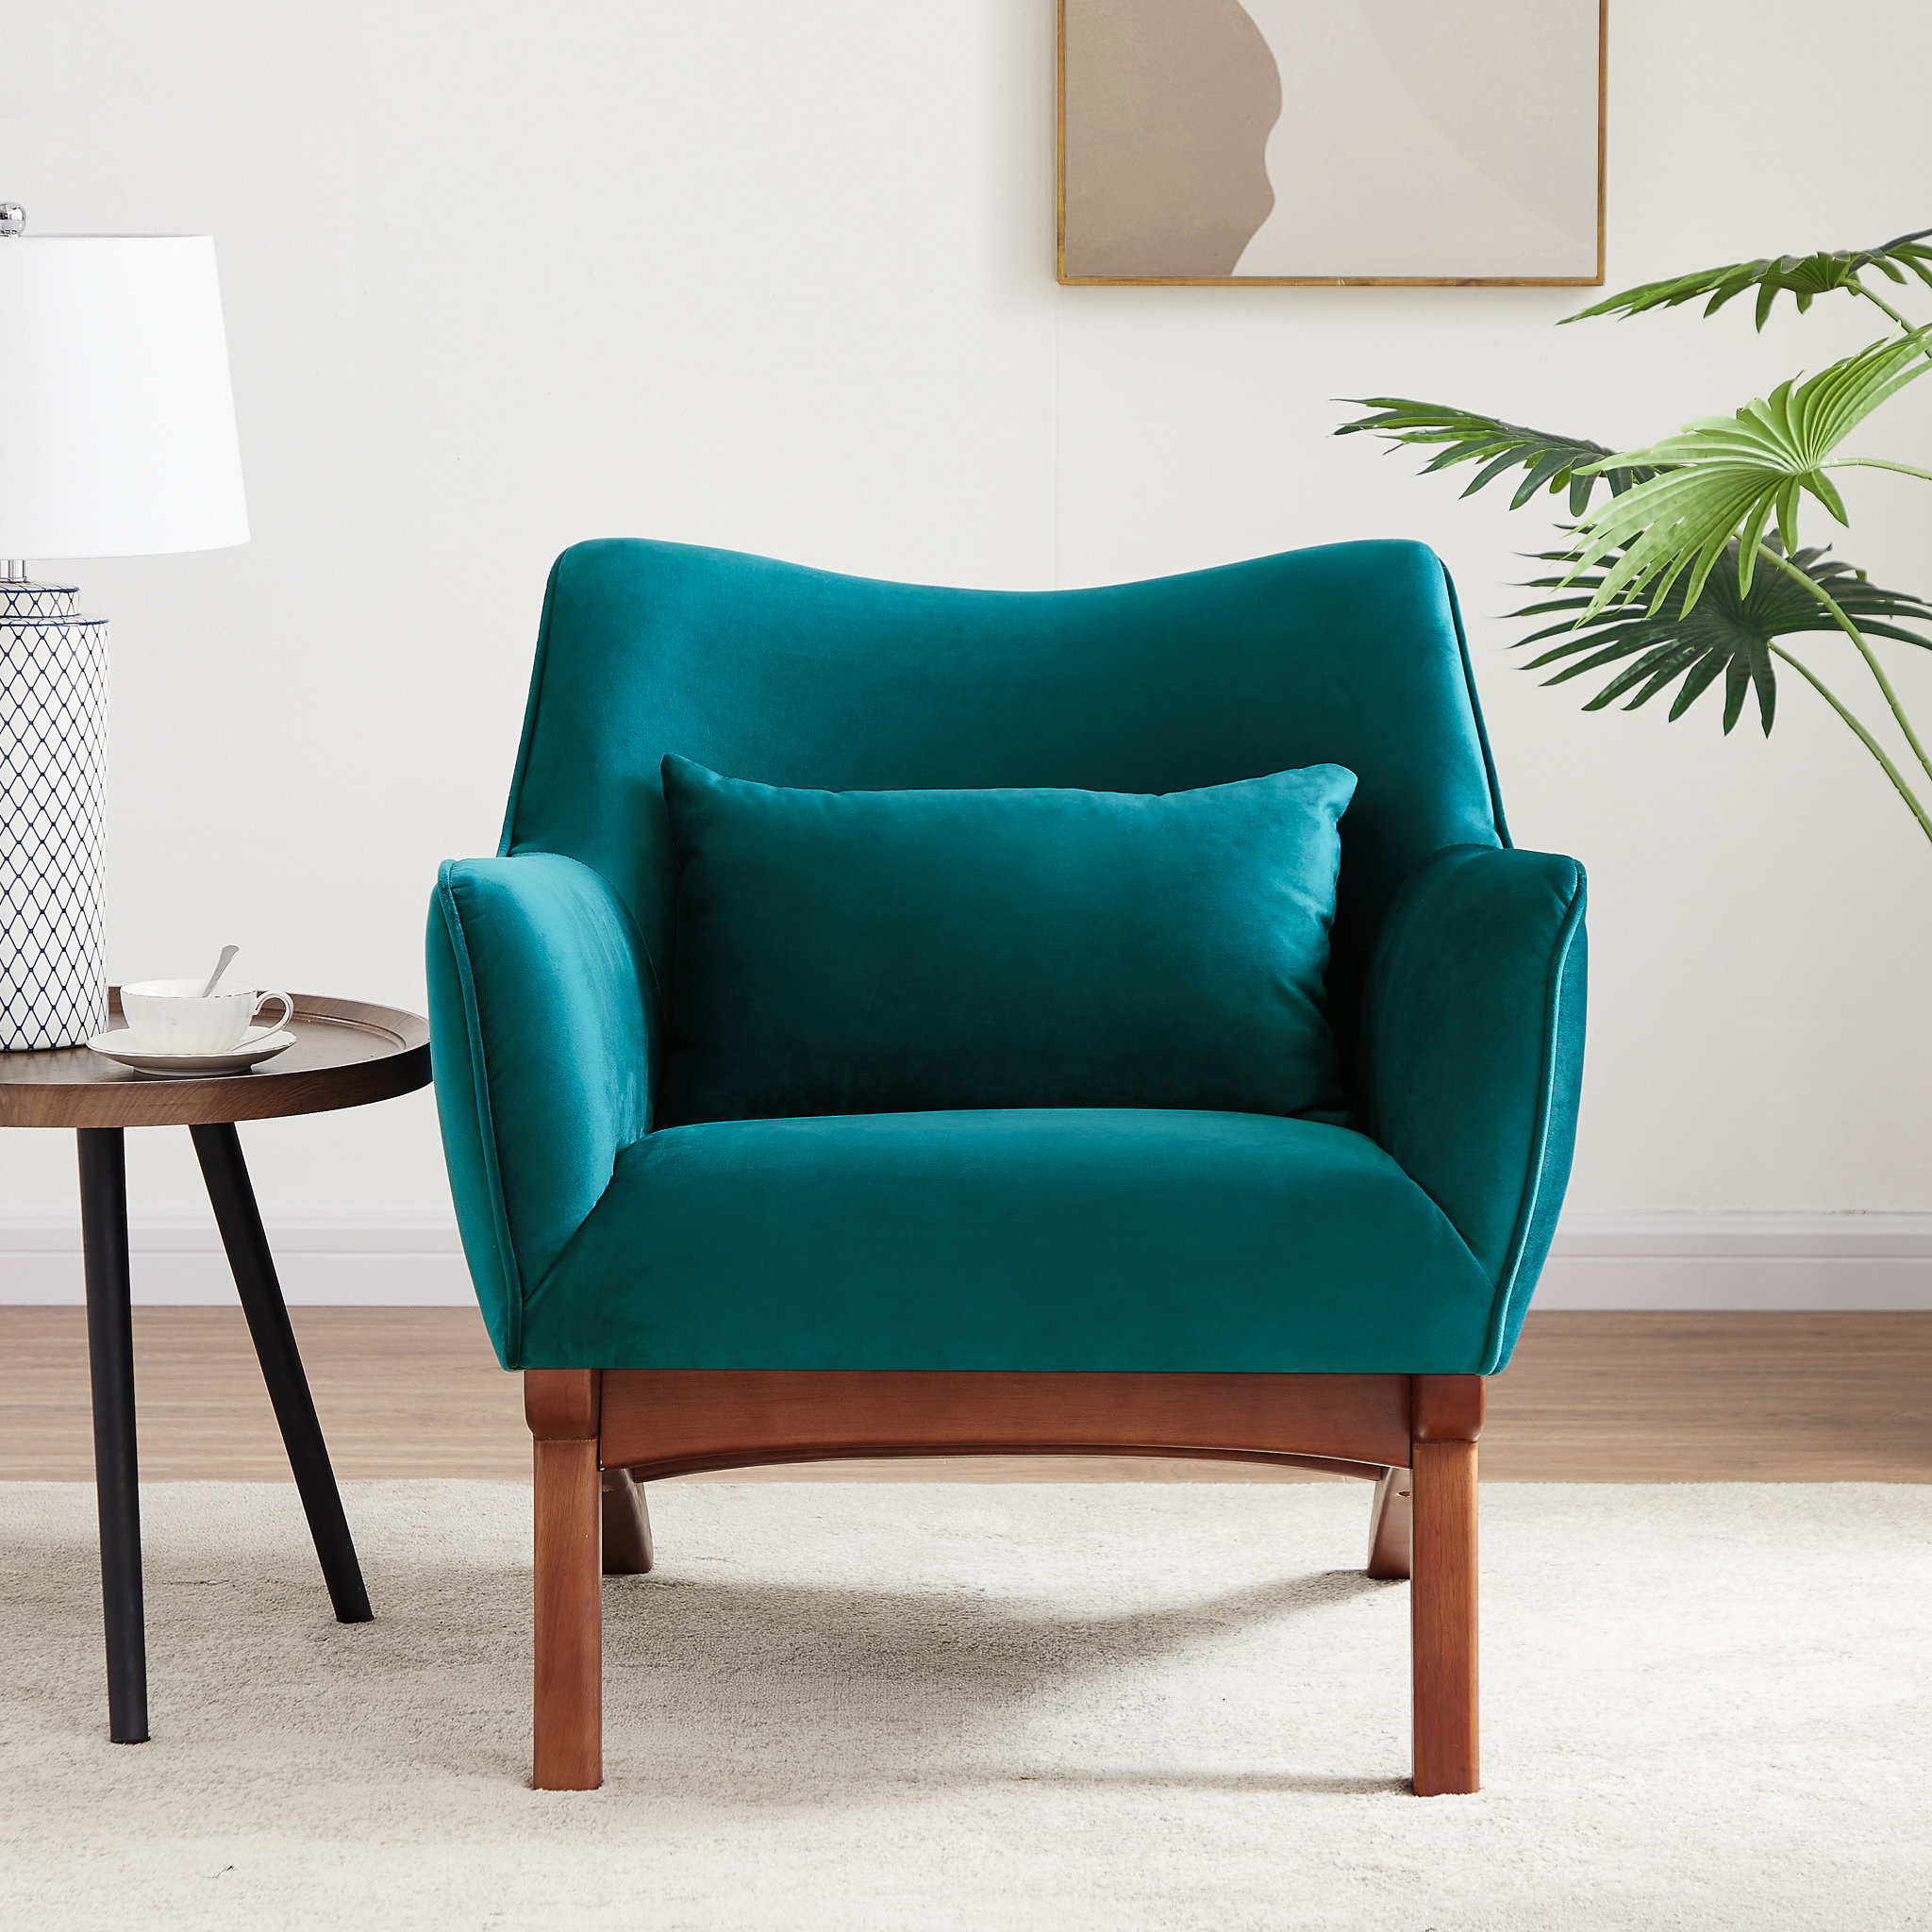 Best armchairs for your home: From leather to velvet   The Independent